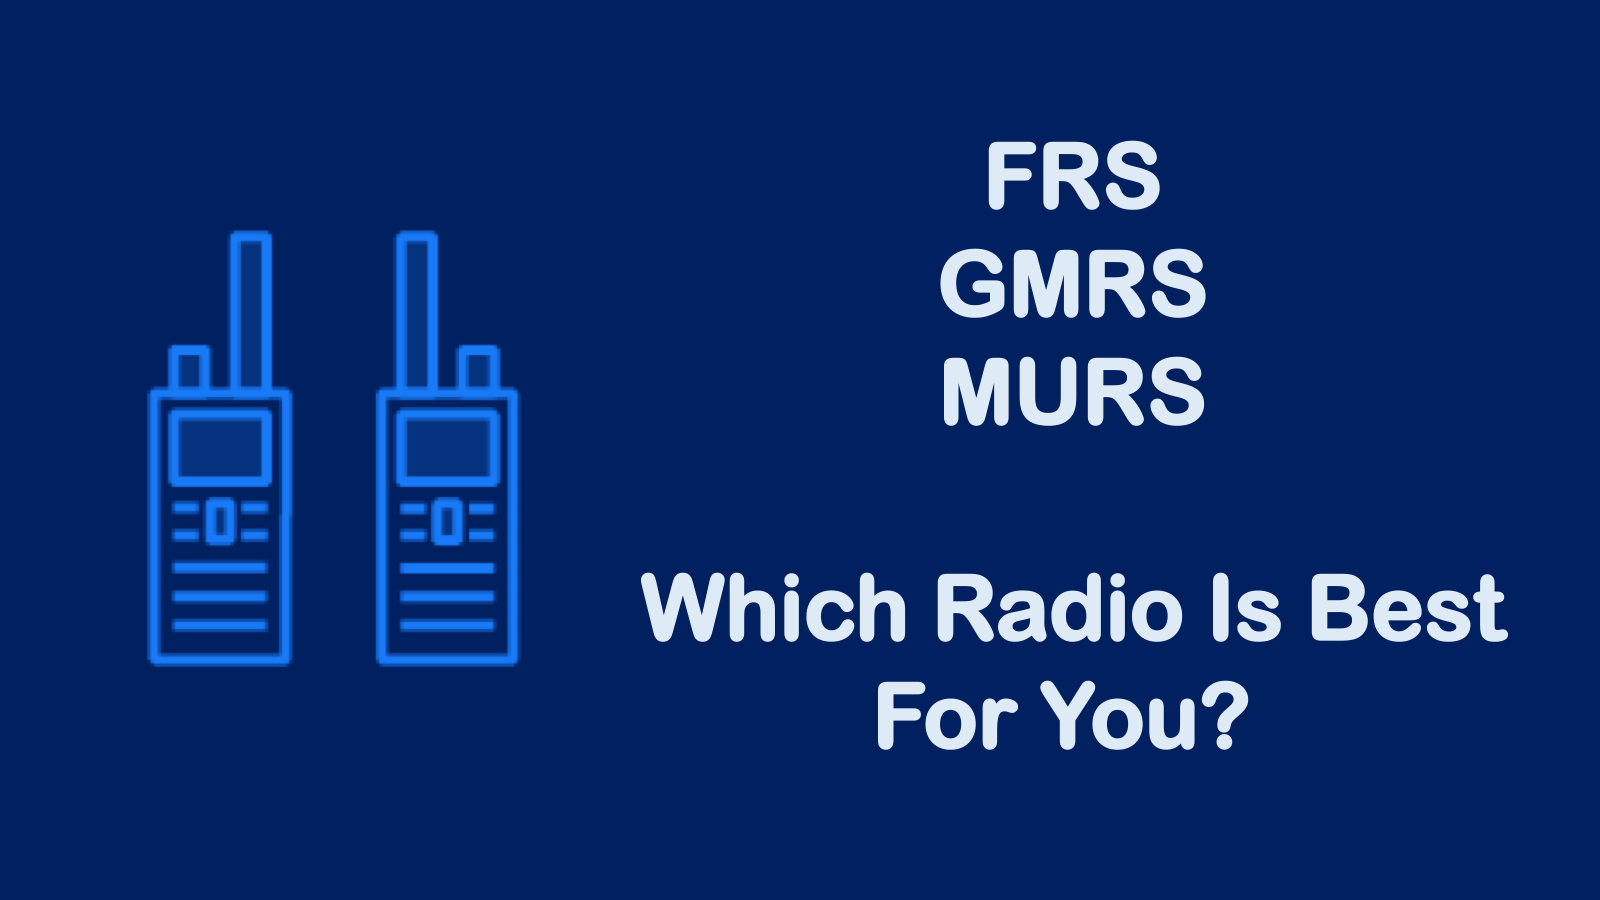 FRS-GMRS-MURS